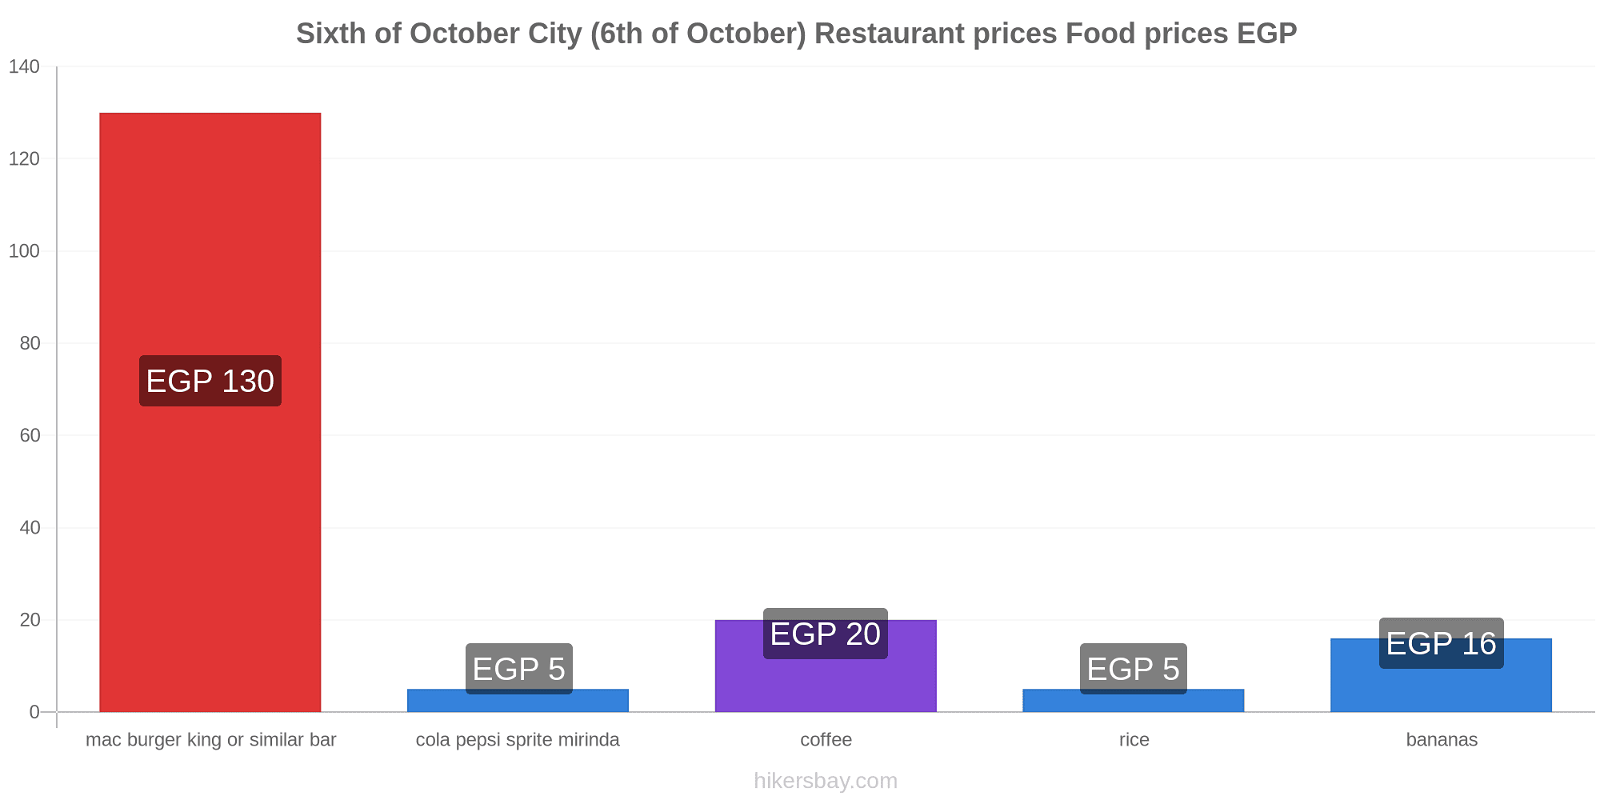 Sixth of October City (6th of October) price changes hikersbay.com